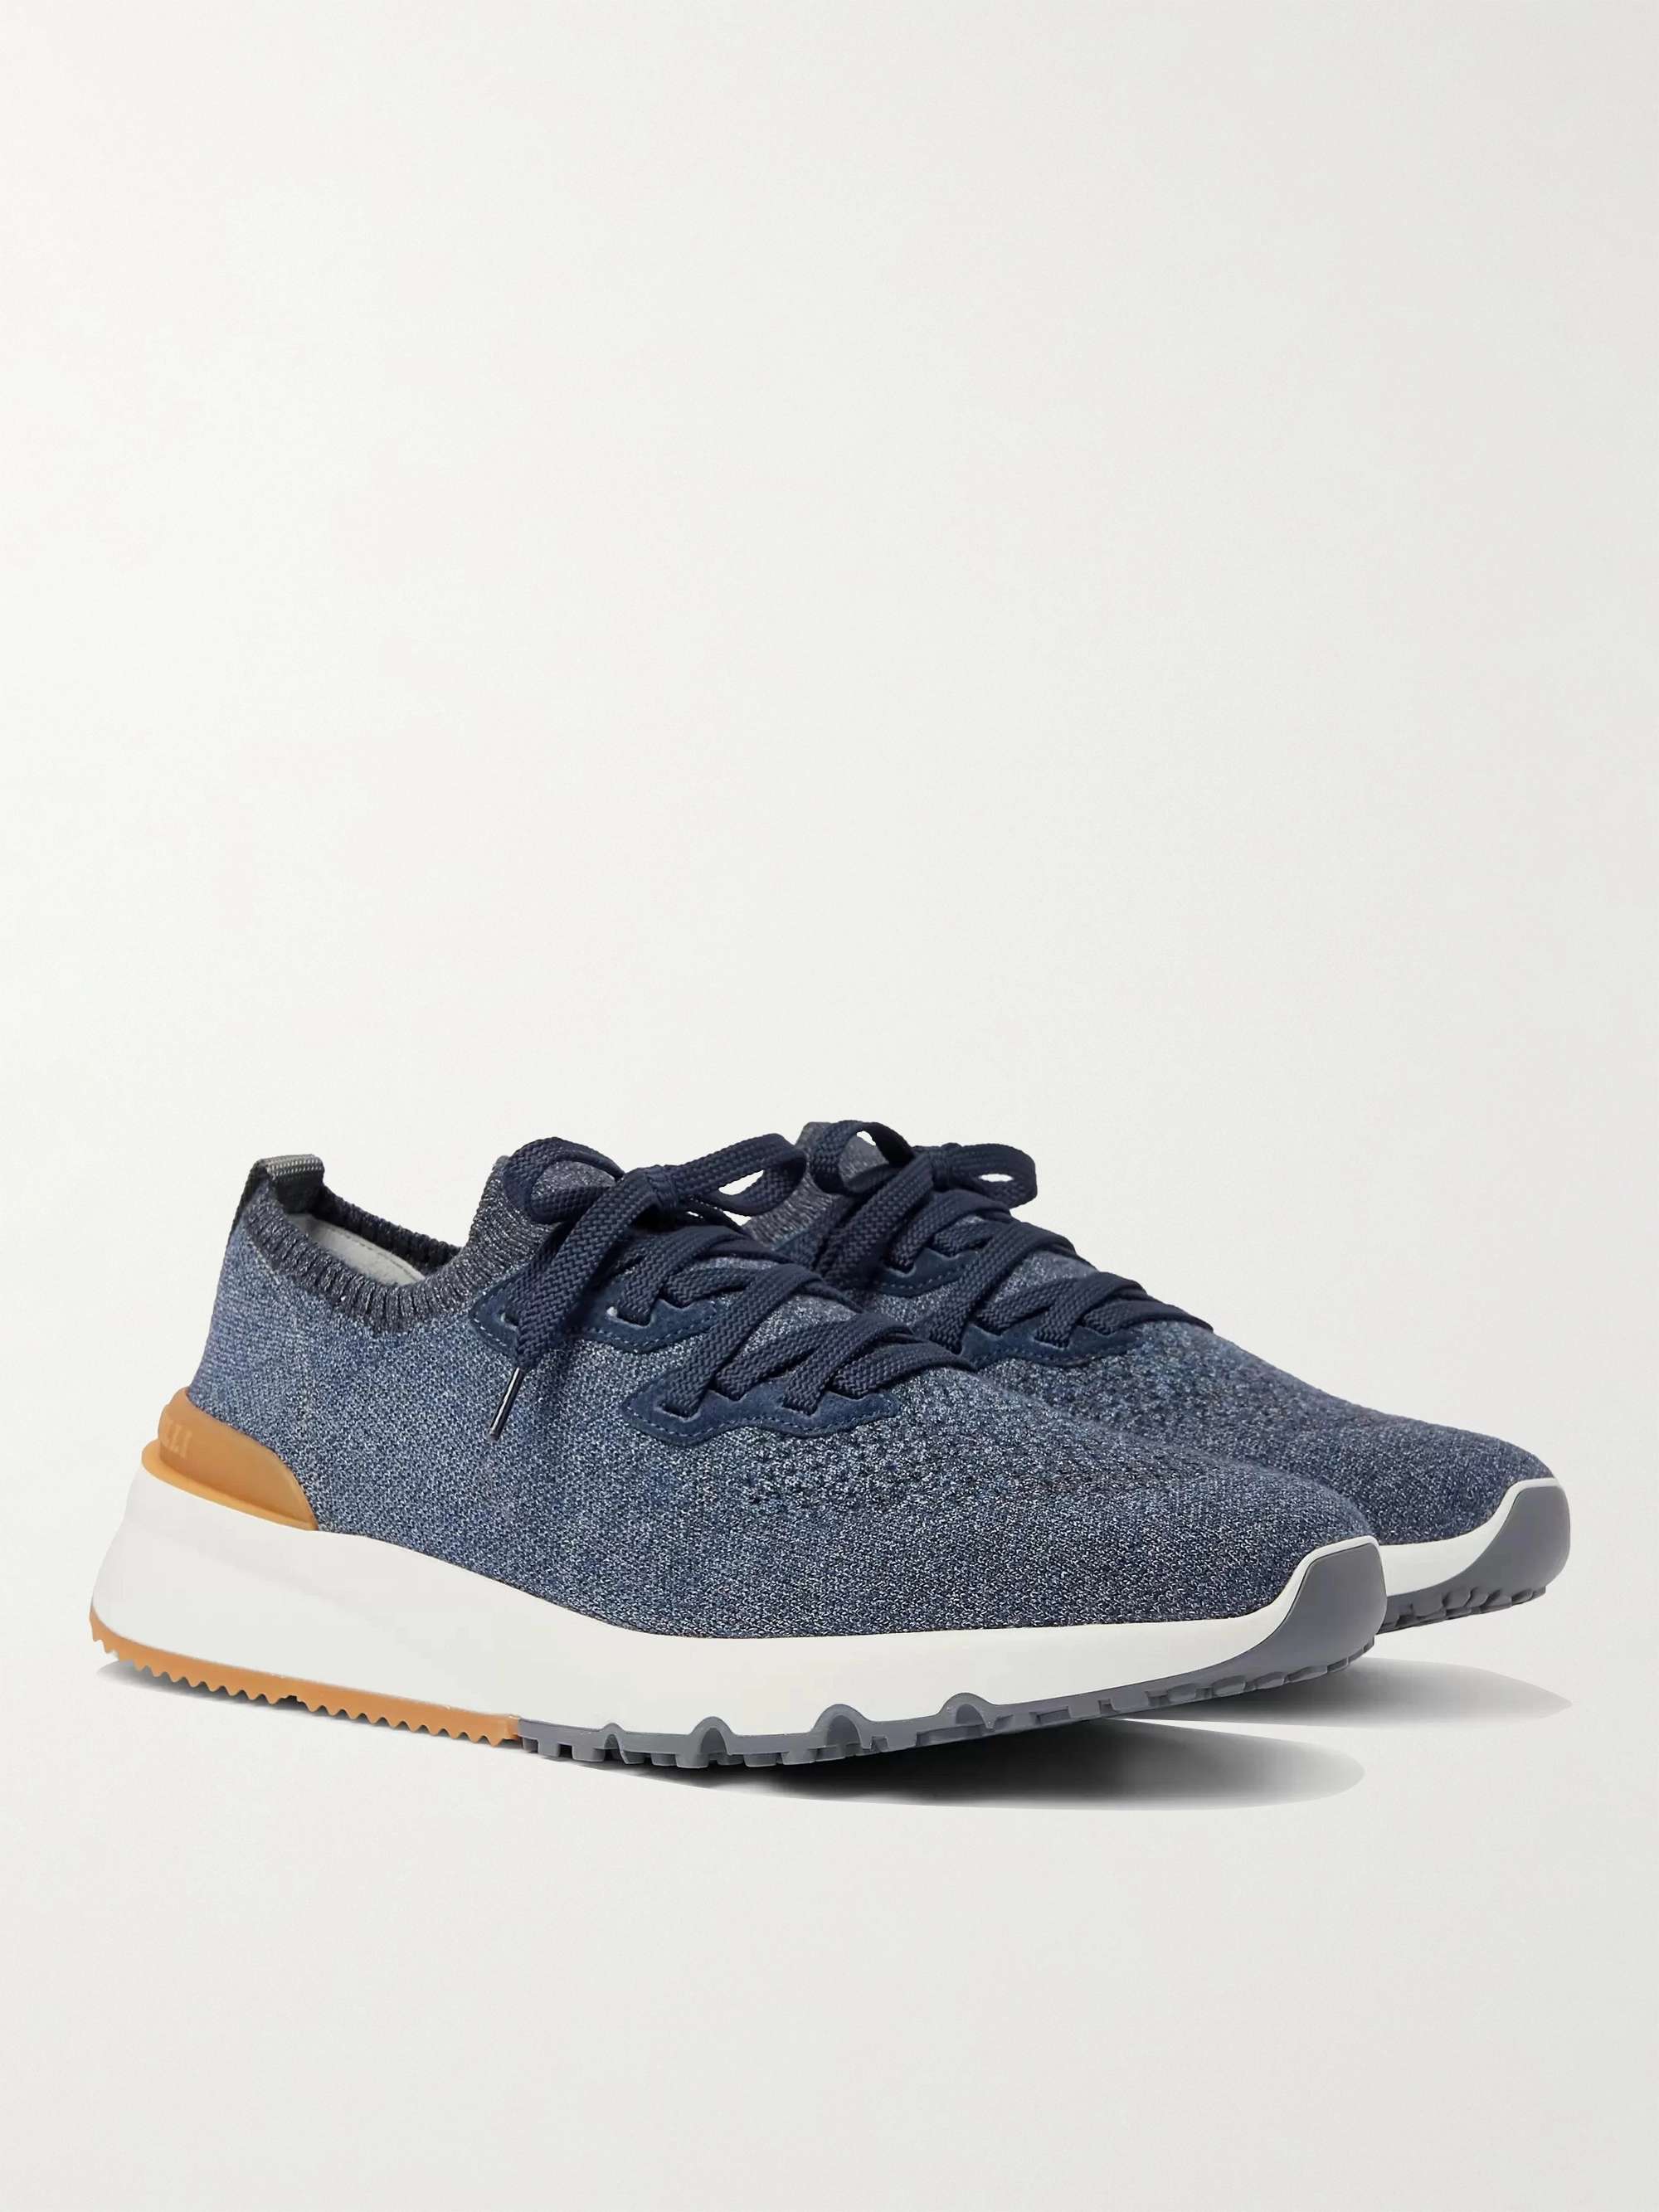 BRUNELLO CUCINELLI Suede-Trimmed Stretch-Knit Sneakers